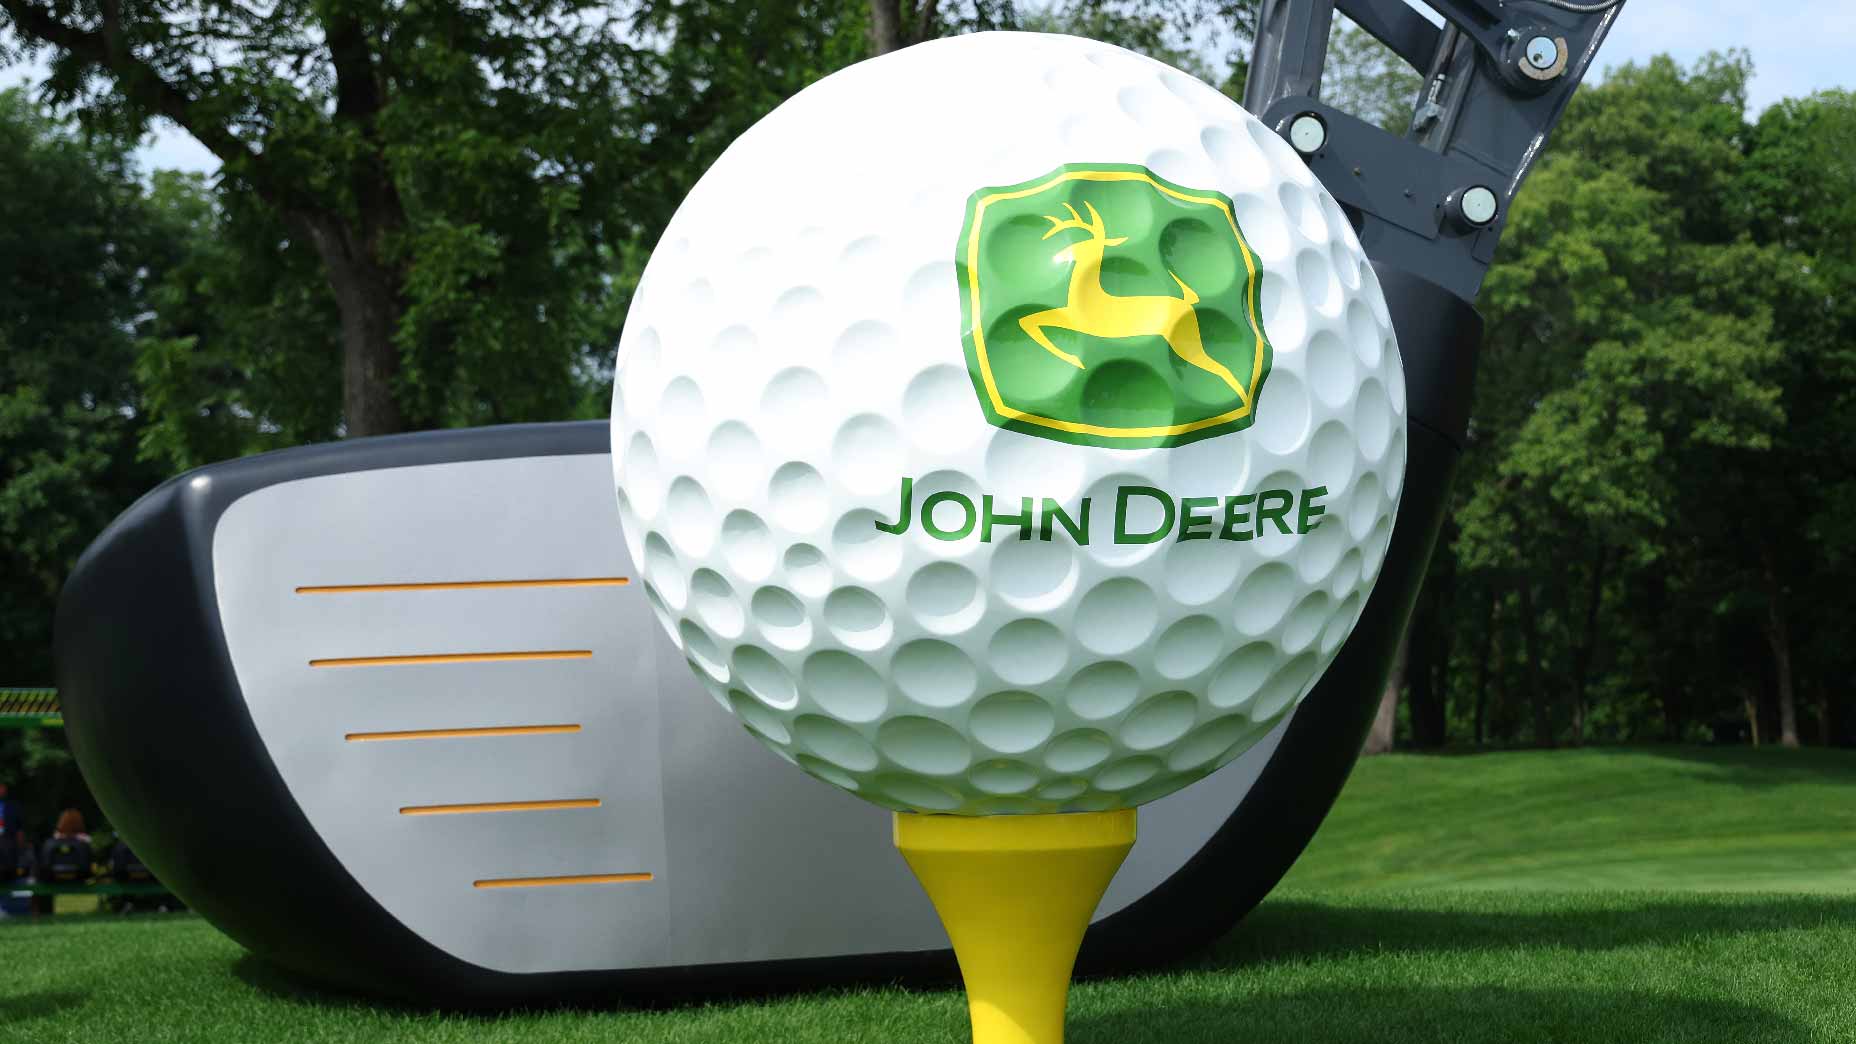 John Deere Classic live coverage How to watch Friday on TV, streaming